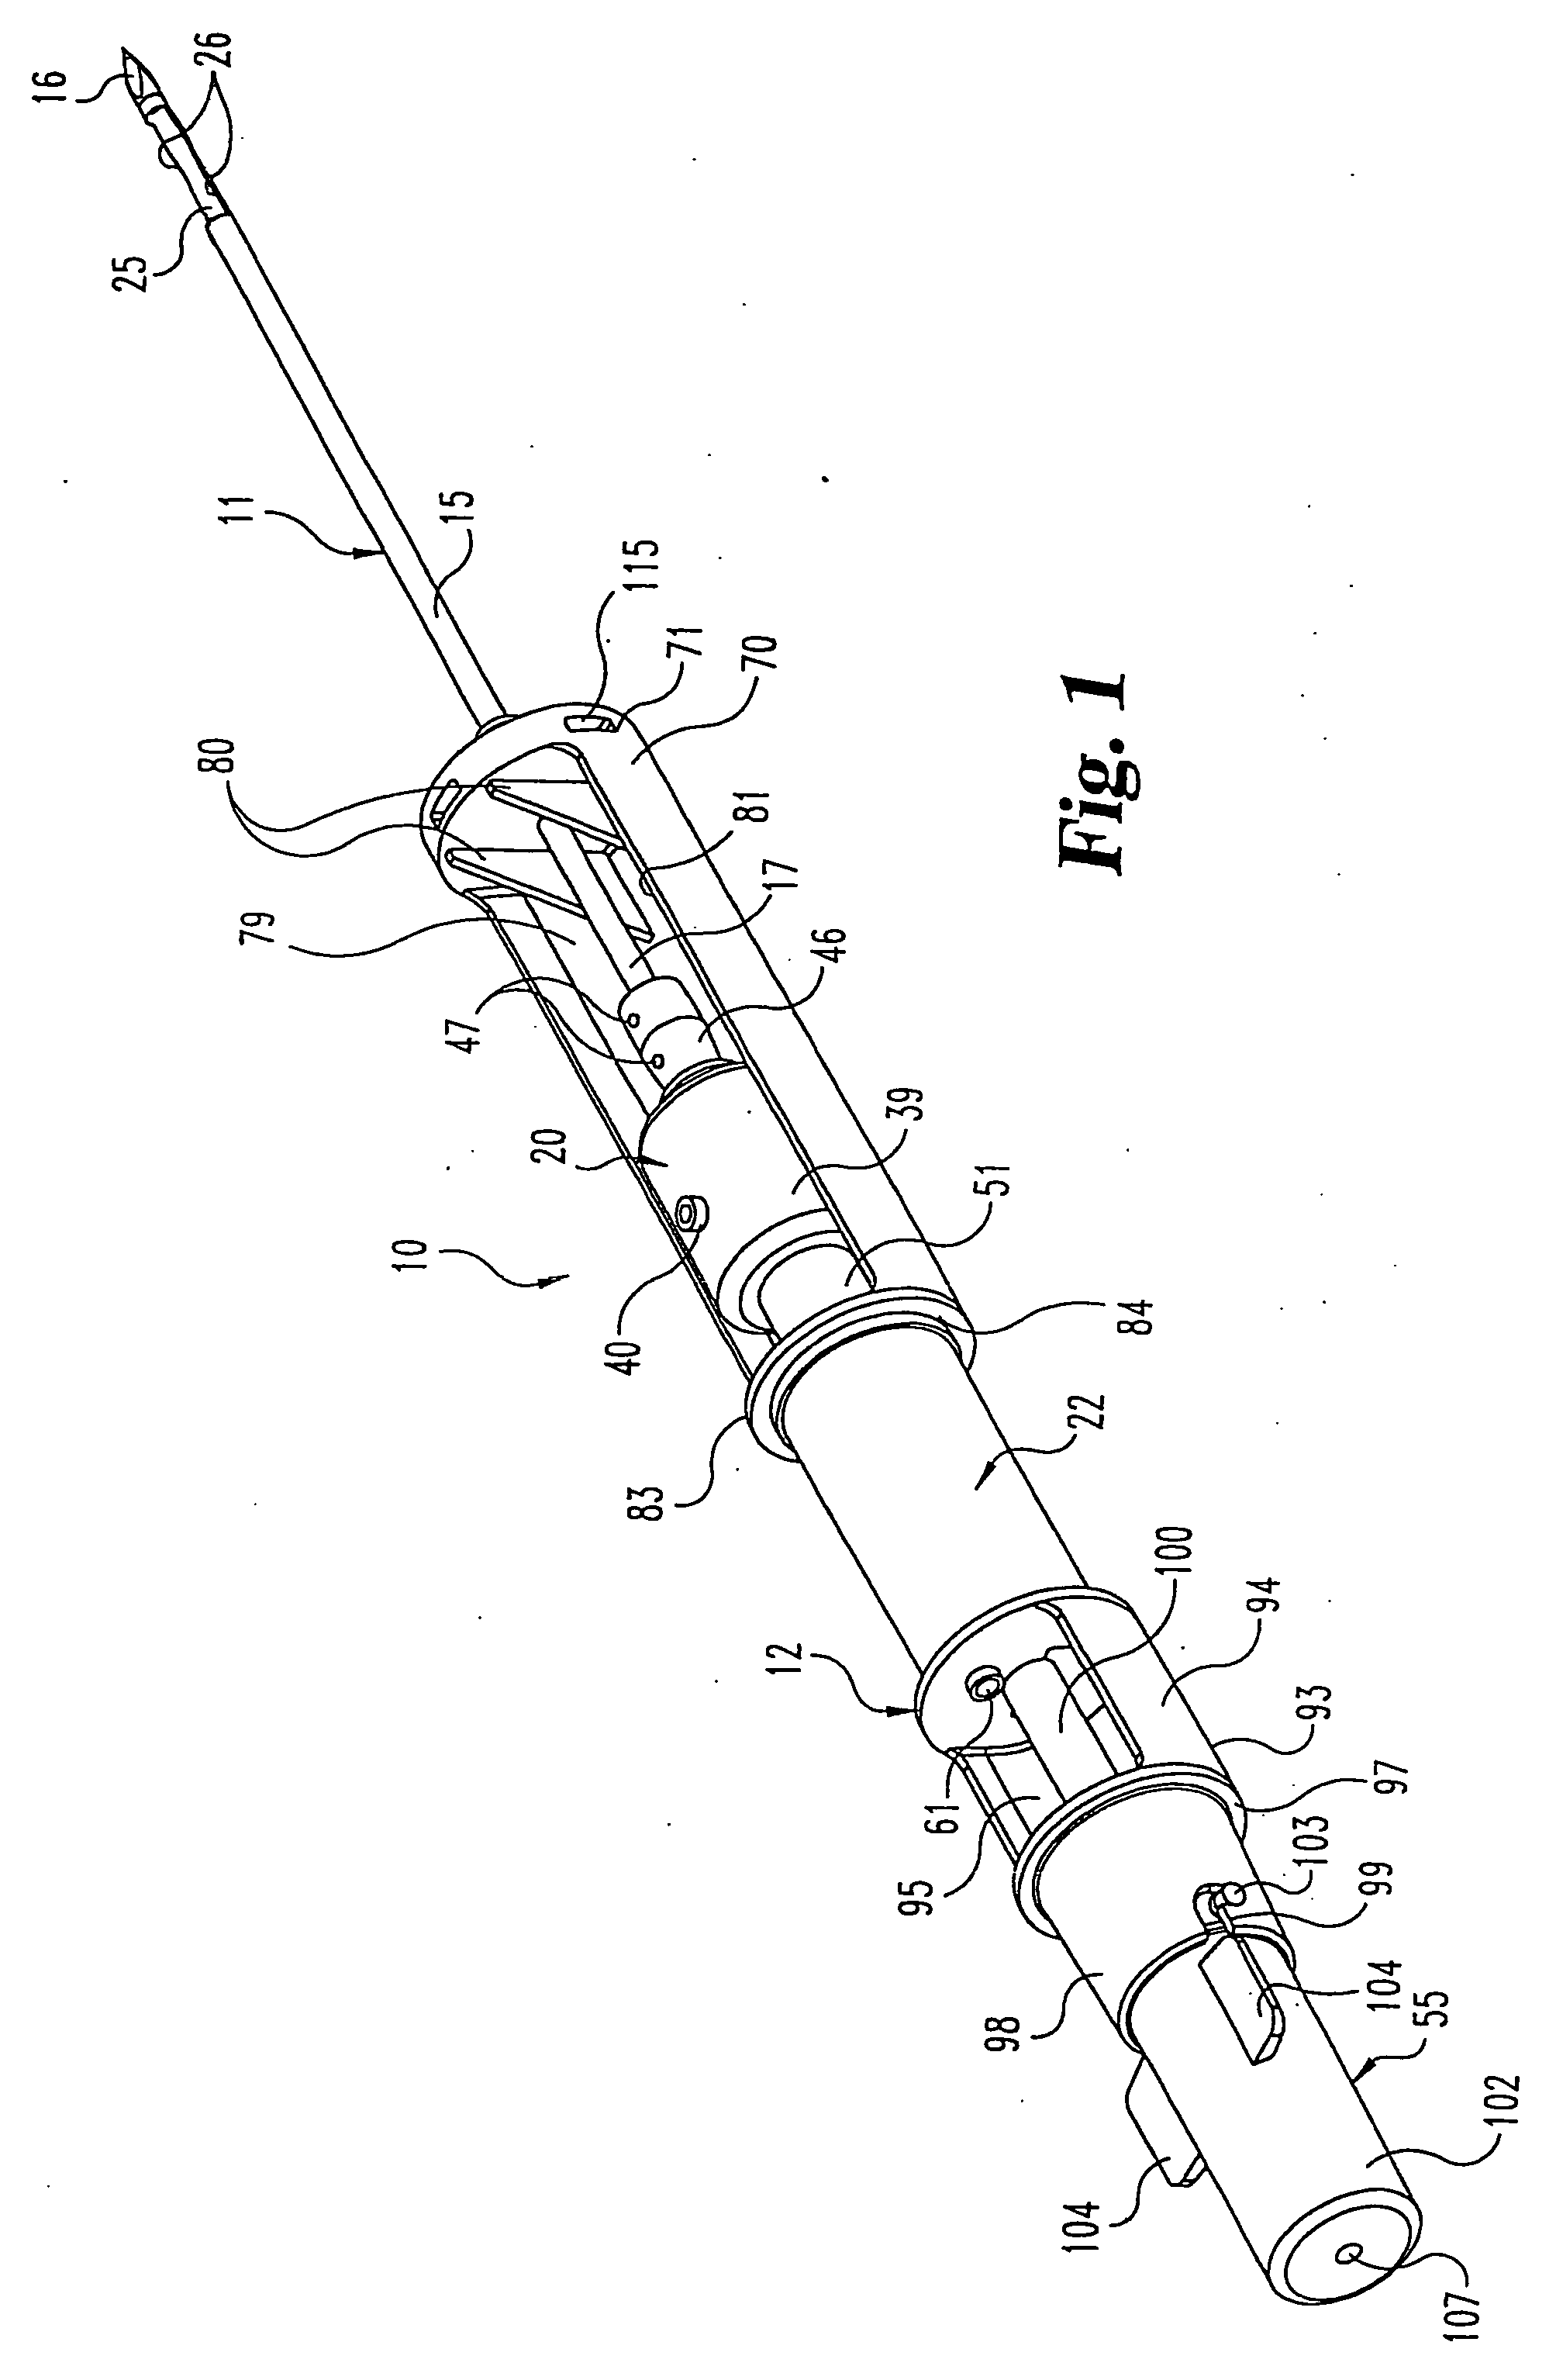 Selectively detachable outer cannula hub